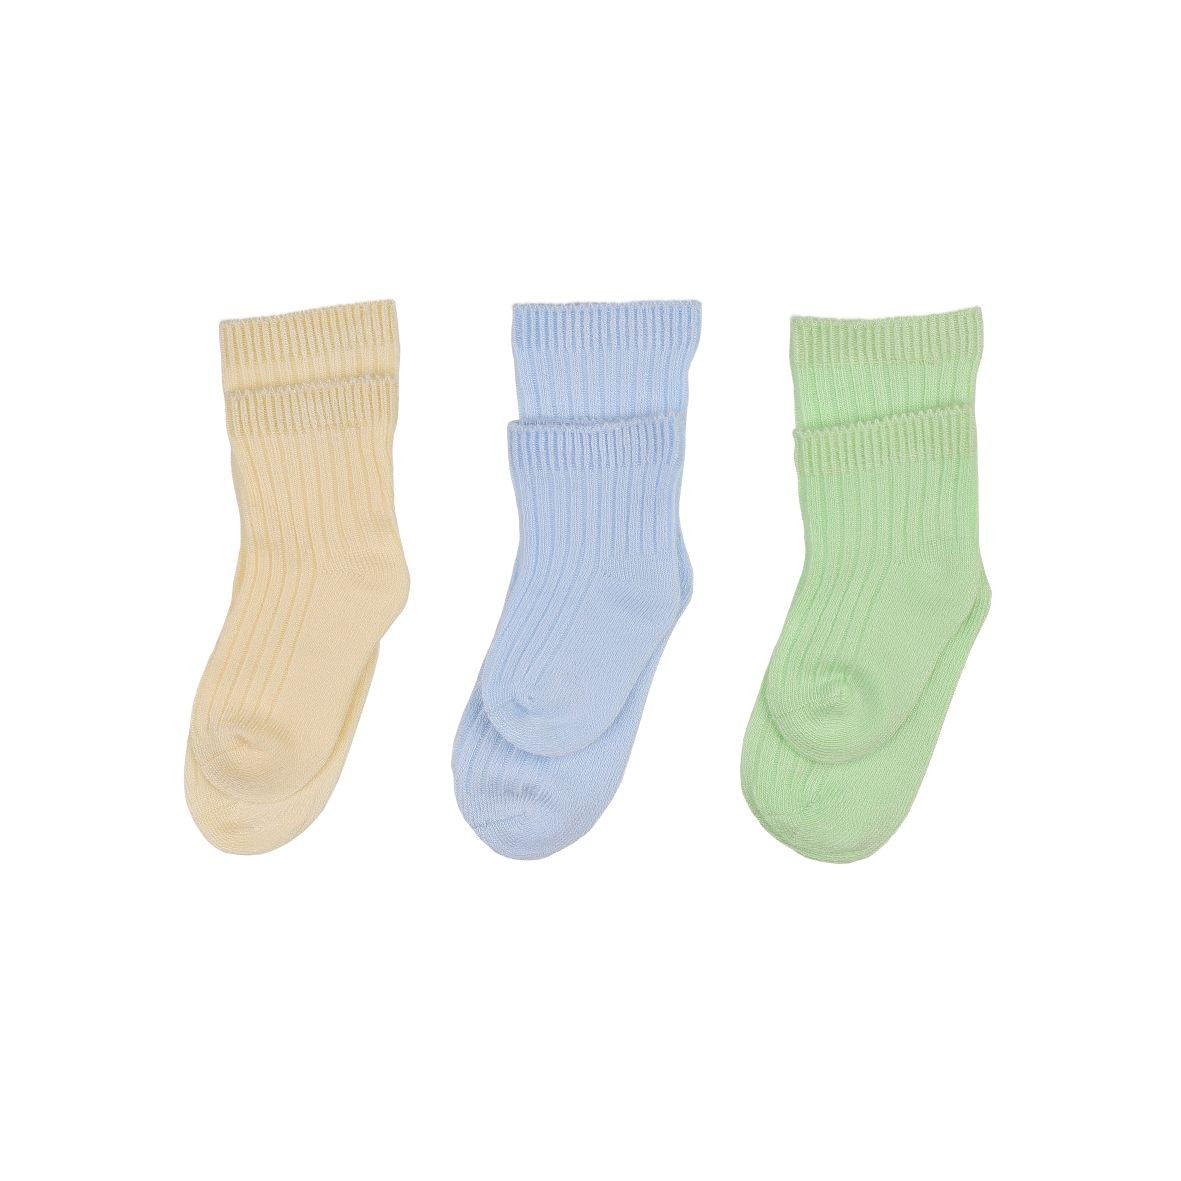 We recommend our Bamboo Socks XKKO BMB - Pastels For Boys 5x box ...